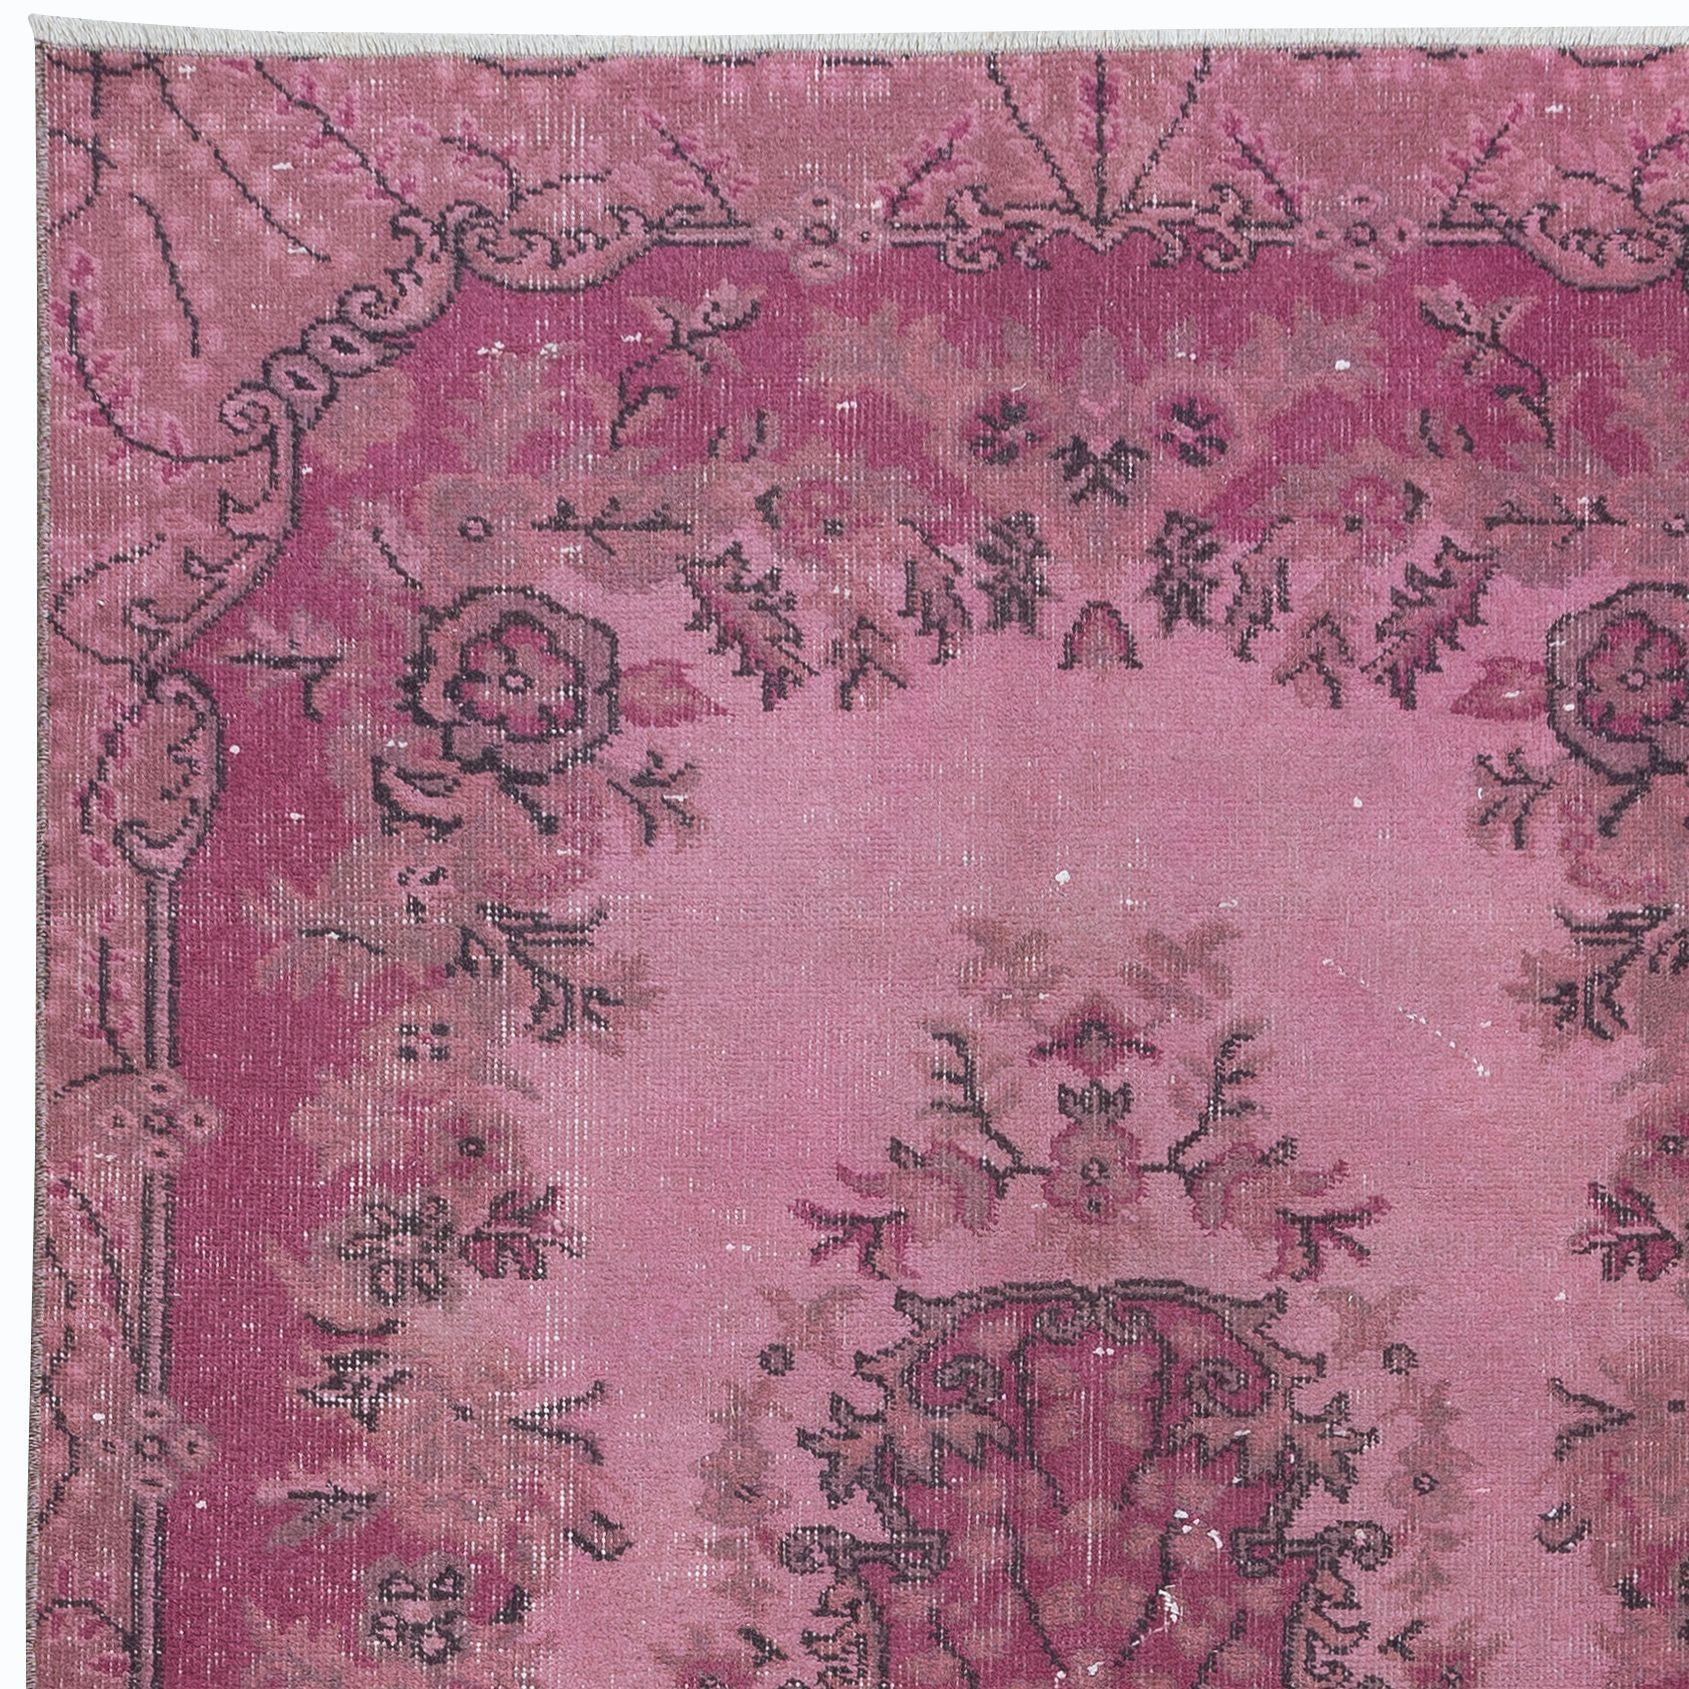 Hand-Woven 3.8x7 Ft Modern Handmade Turkish Medallion Design Accent Rug in Pink Tones For Sale